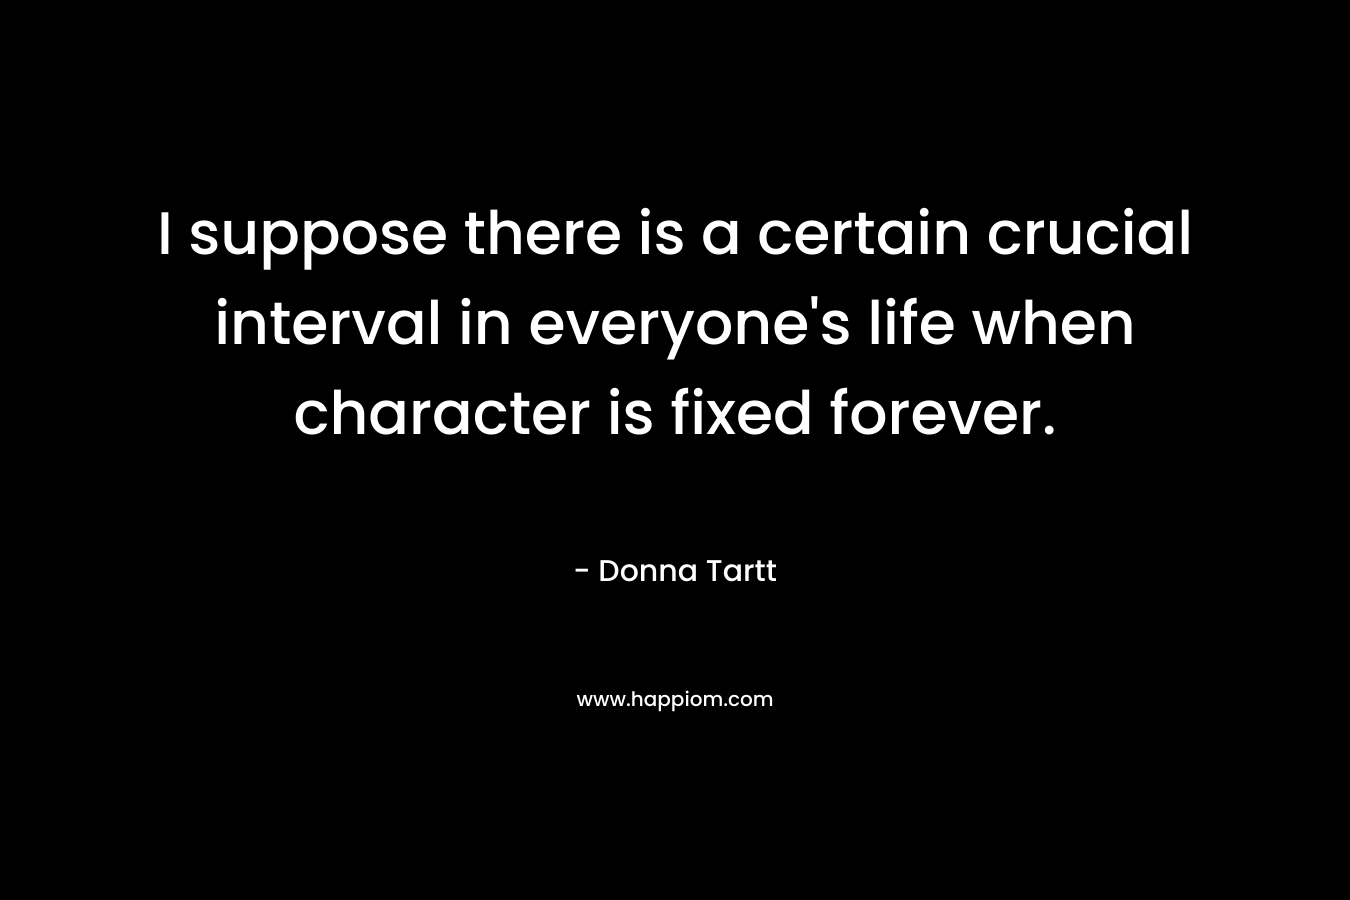 I suppose there is a certain crucial interval in everyone’s life when character is fixed forever. – Donna Tartt